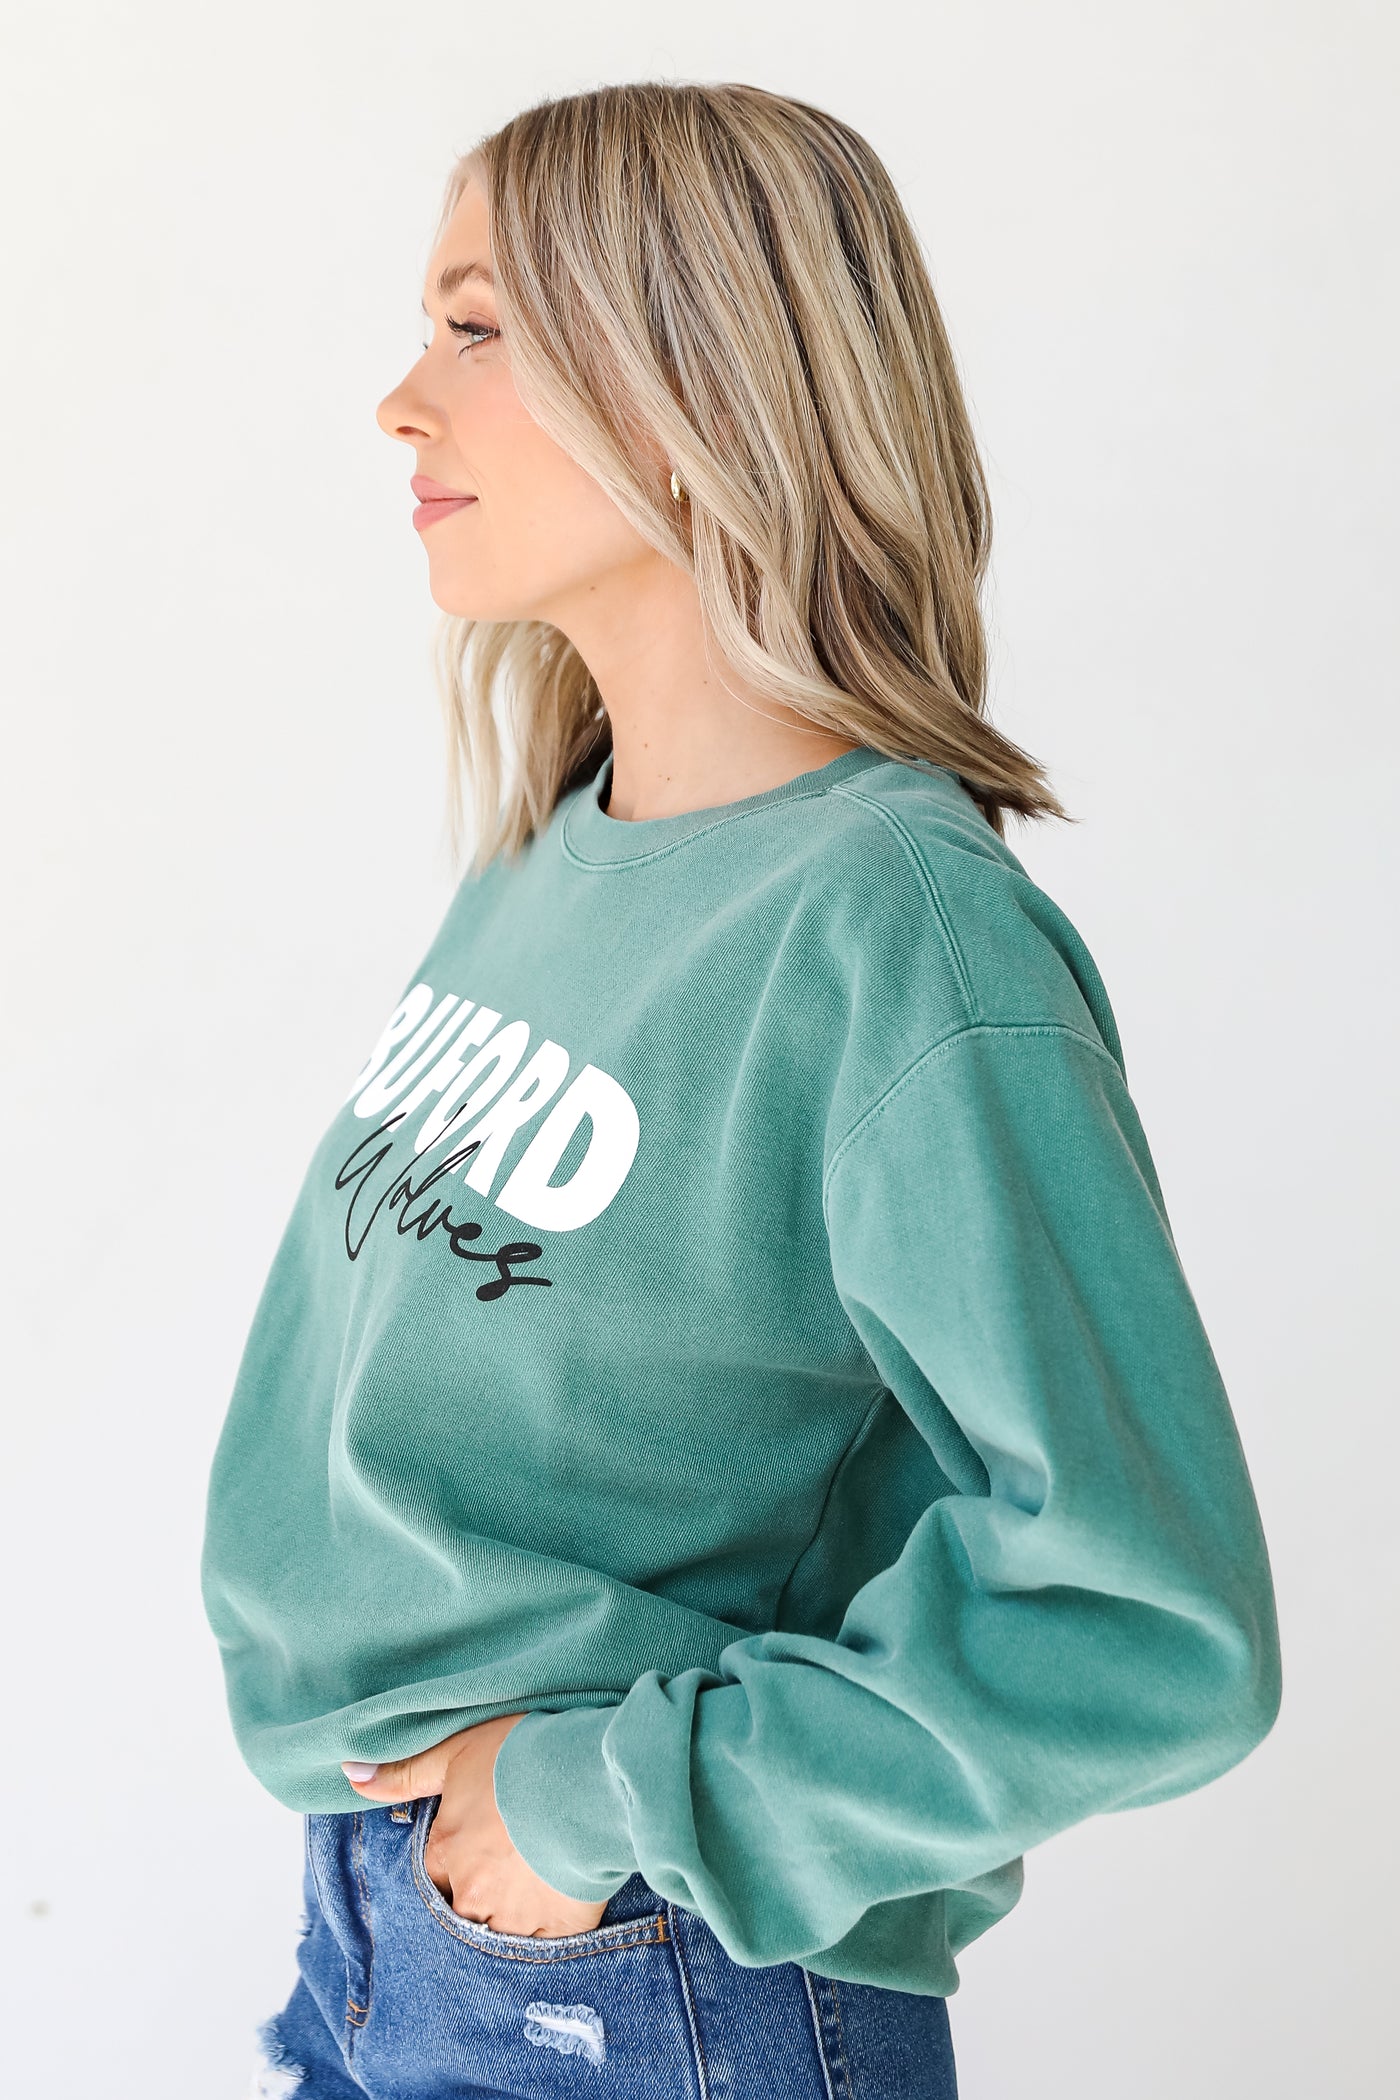 Green Buford Wolves Pullover side view